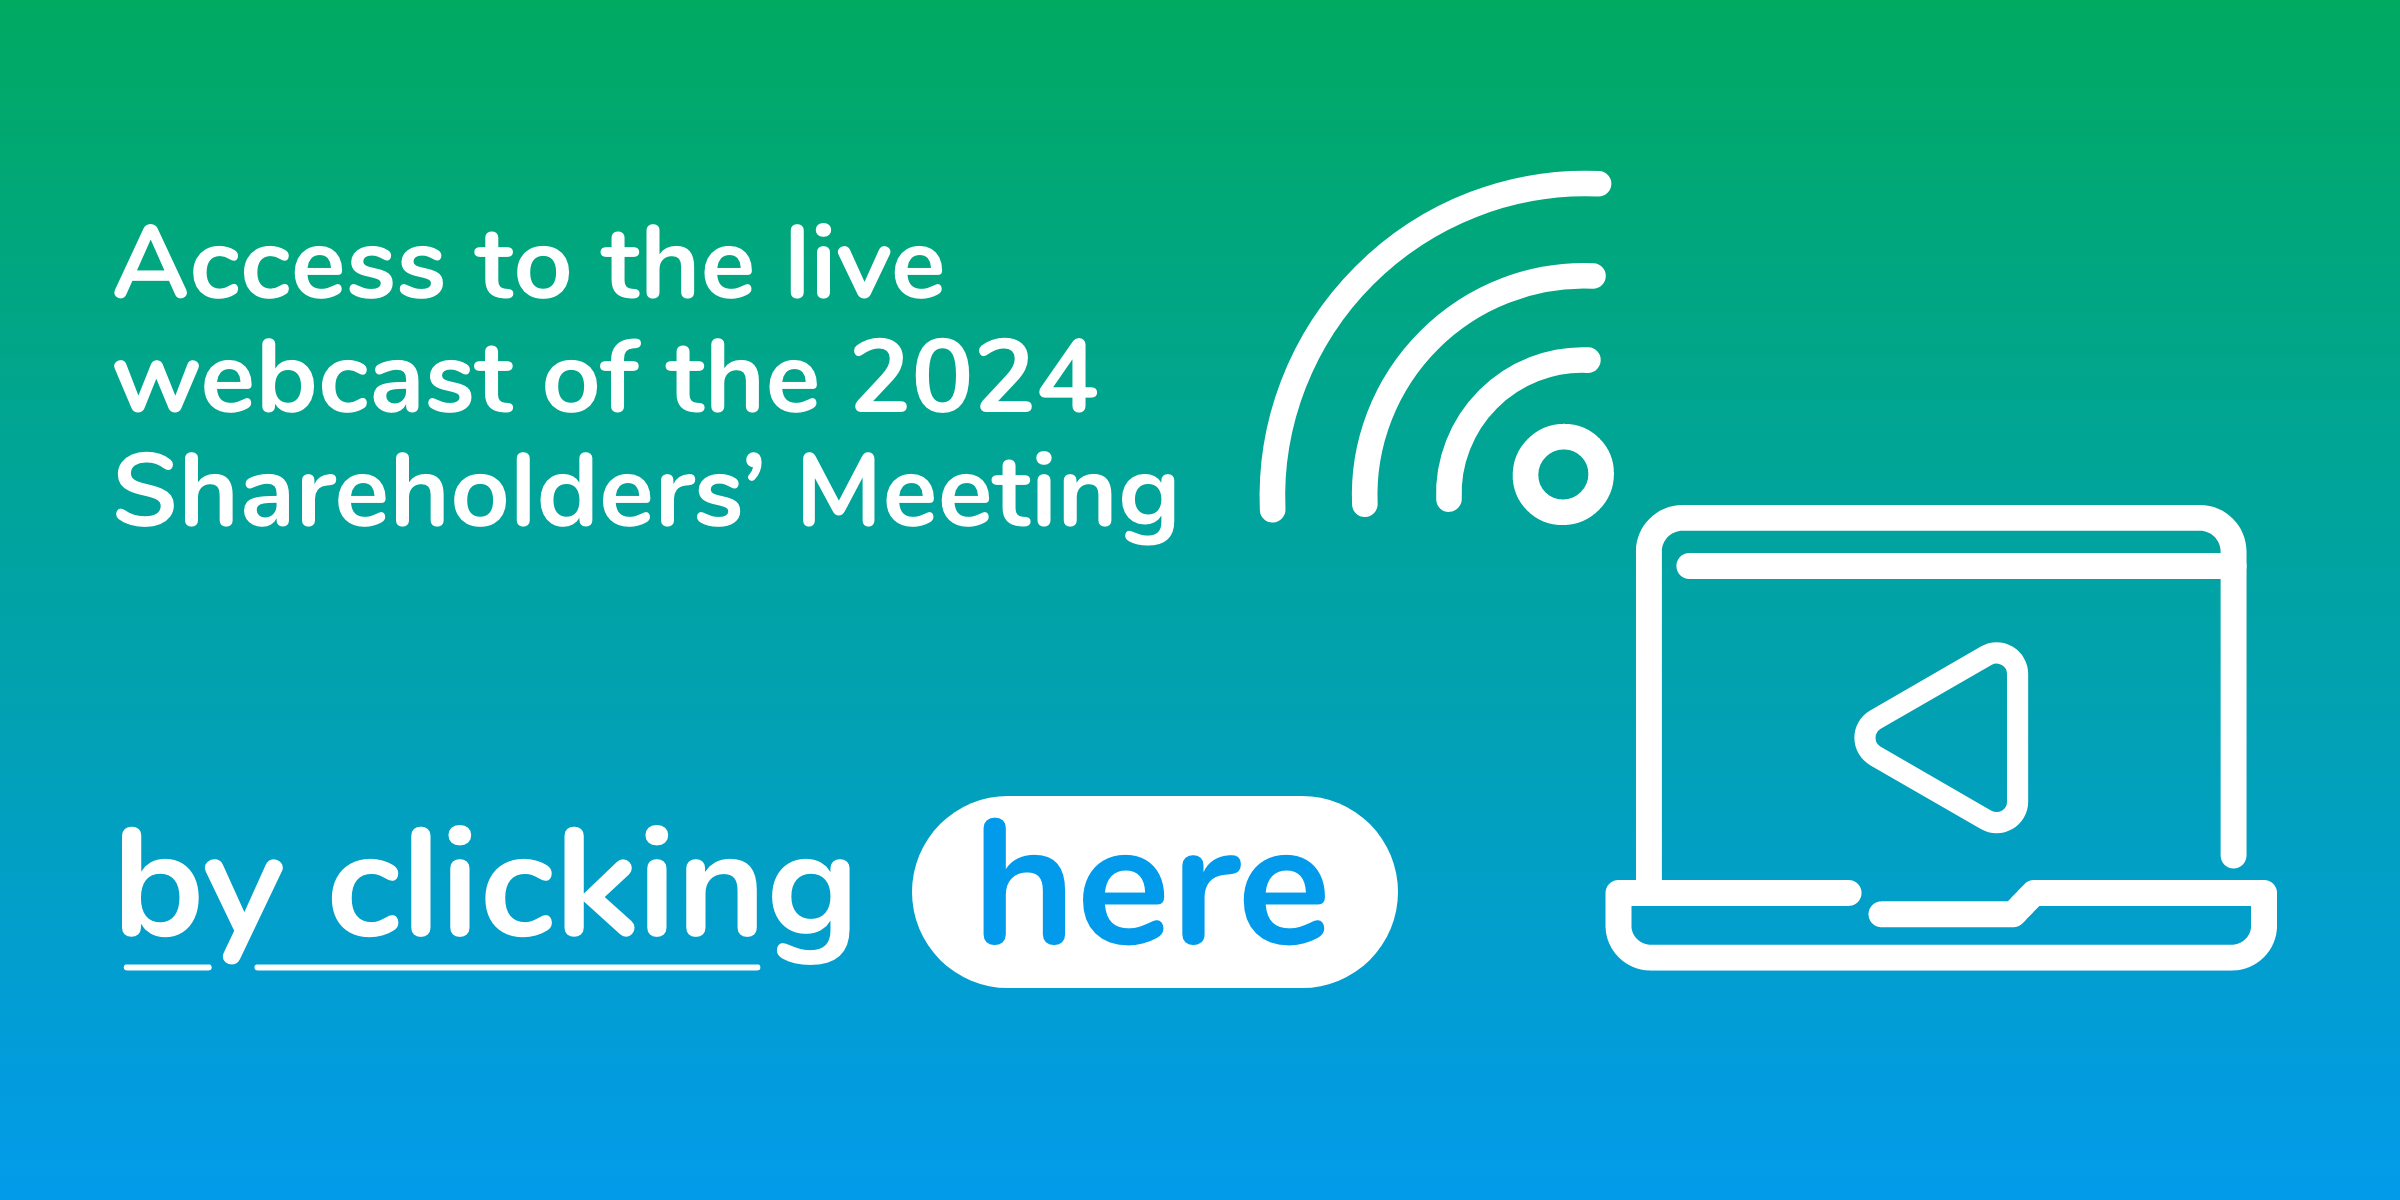 Access to the live webcast of the 2024 Shareholders' Meeting by clicking here